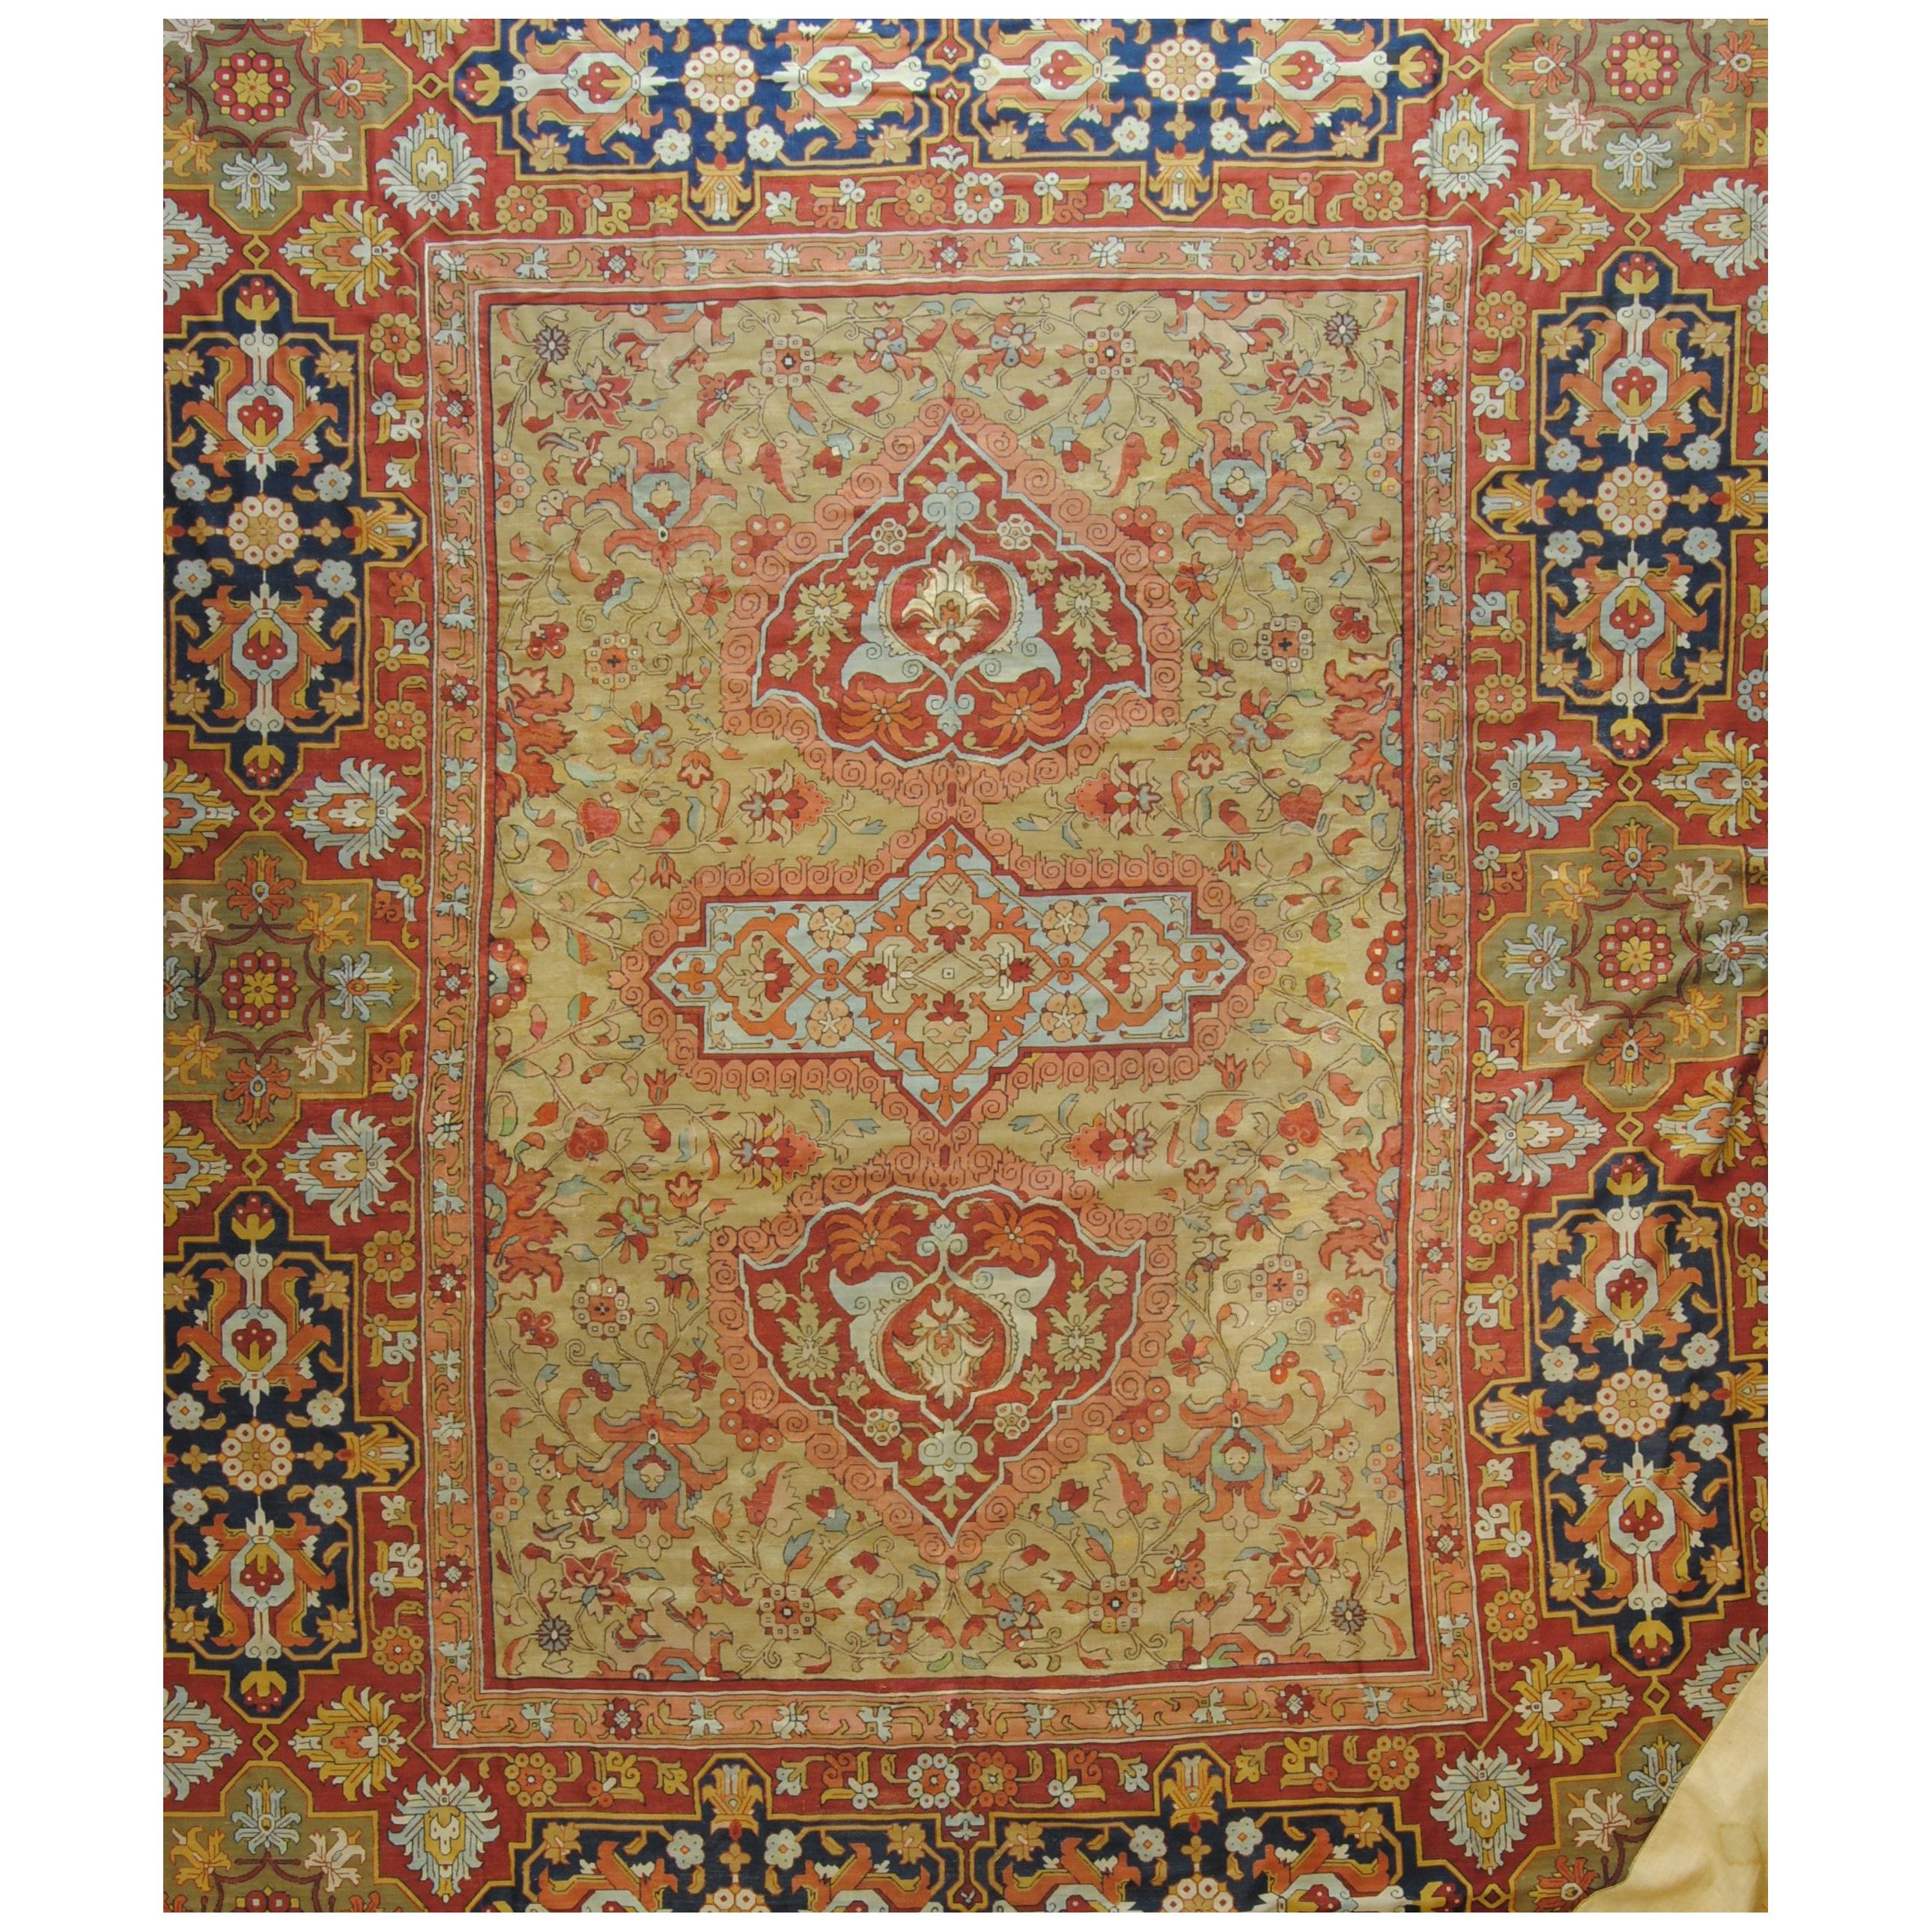 20th Century Blue Red Gold Pink Flat-Weave Medallions Indian Rug, circa 1920